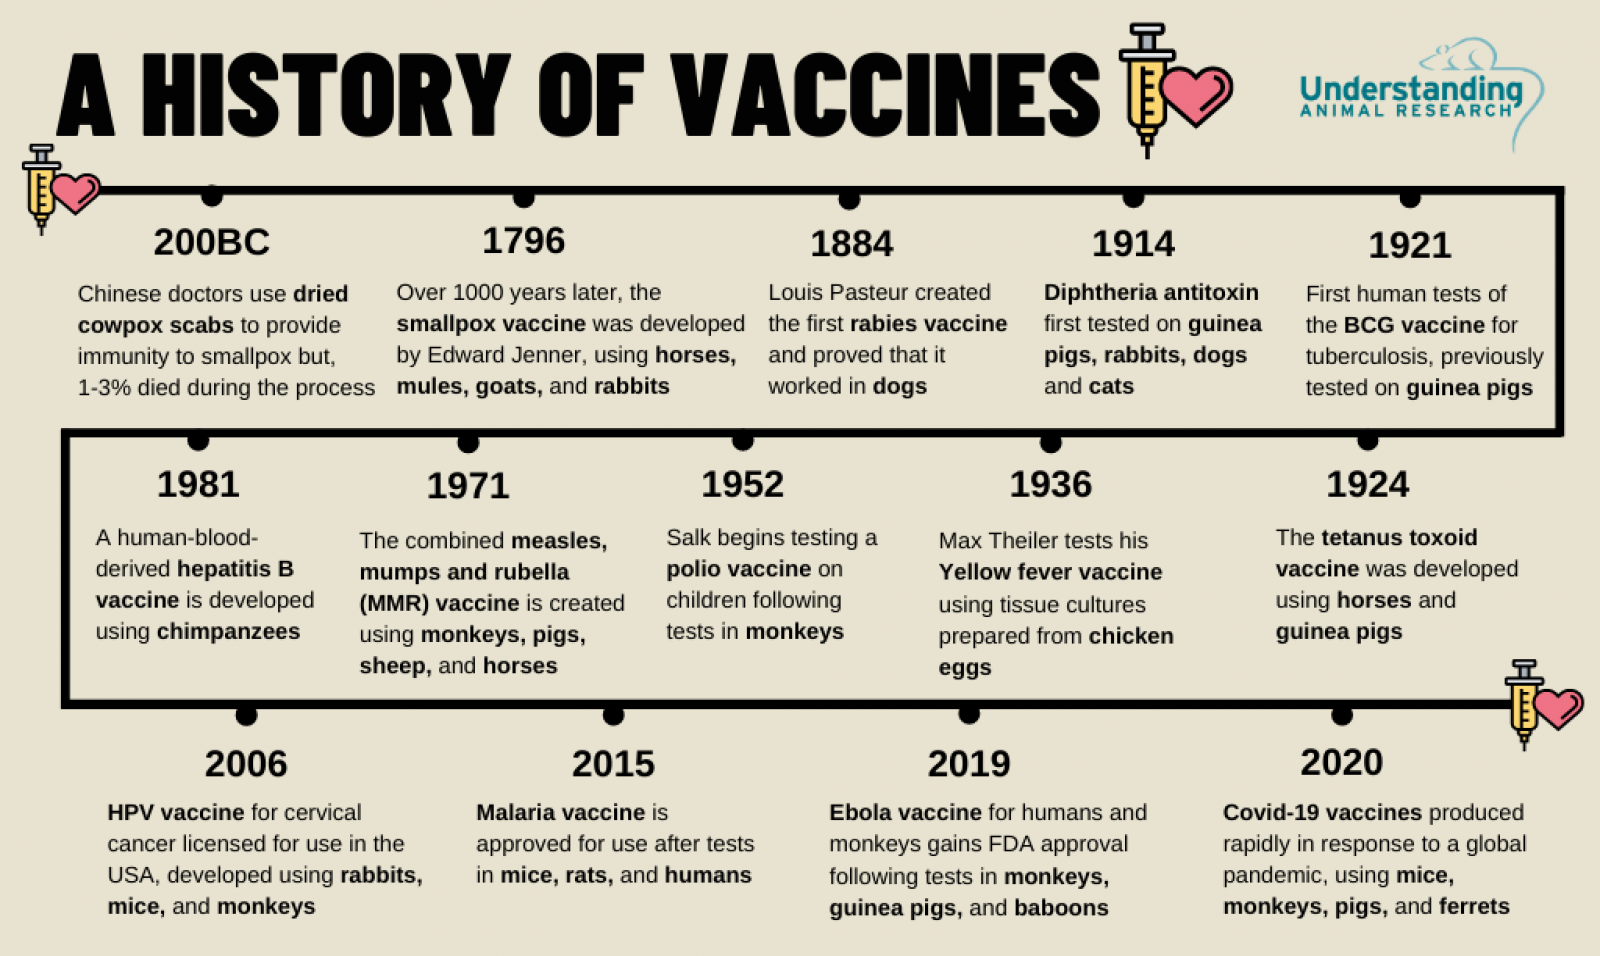 History of vaccines timeline